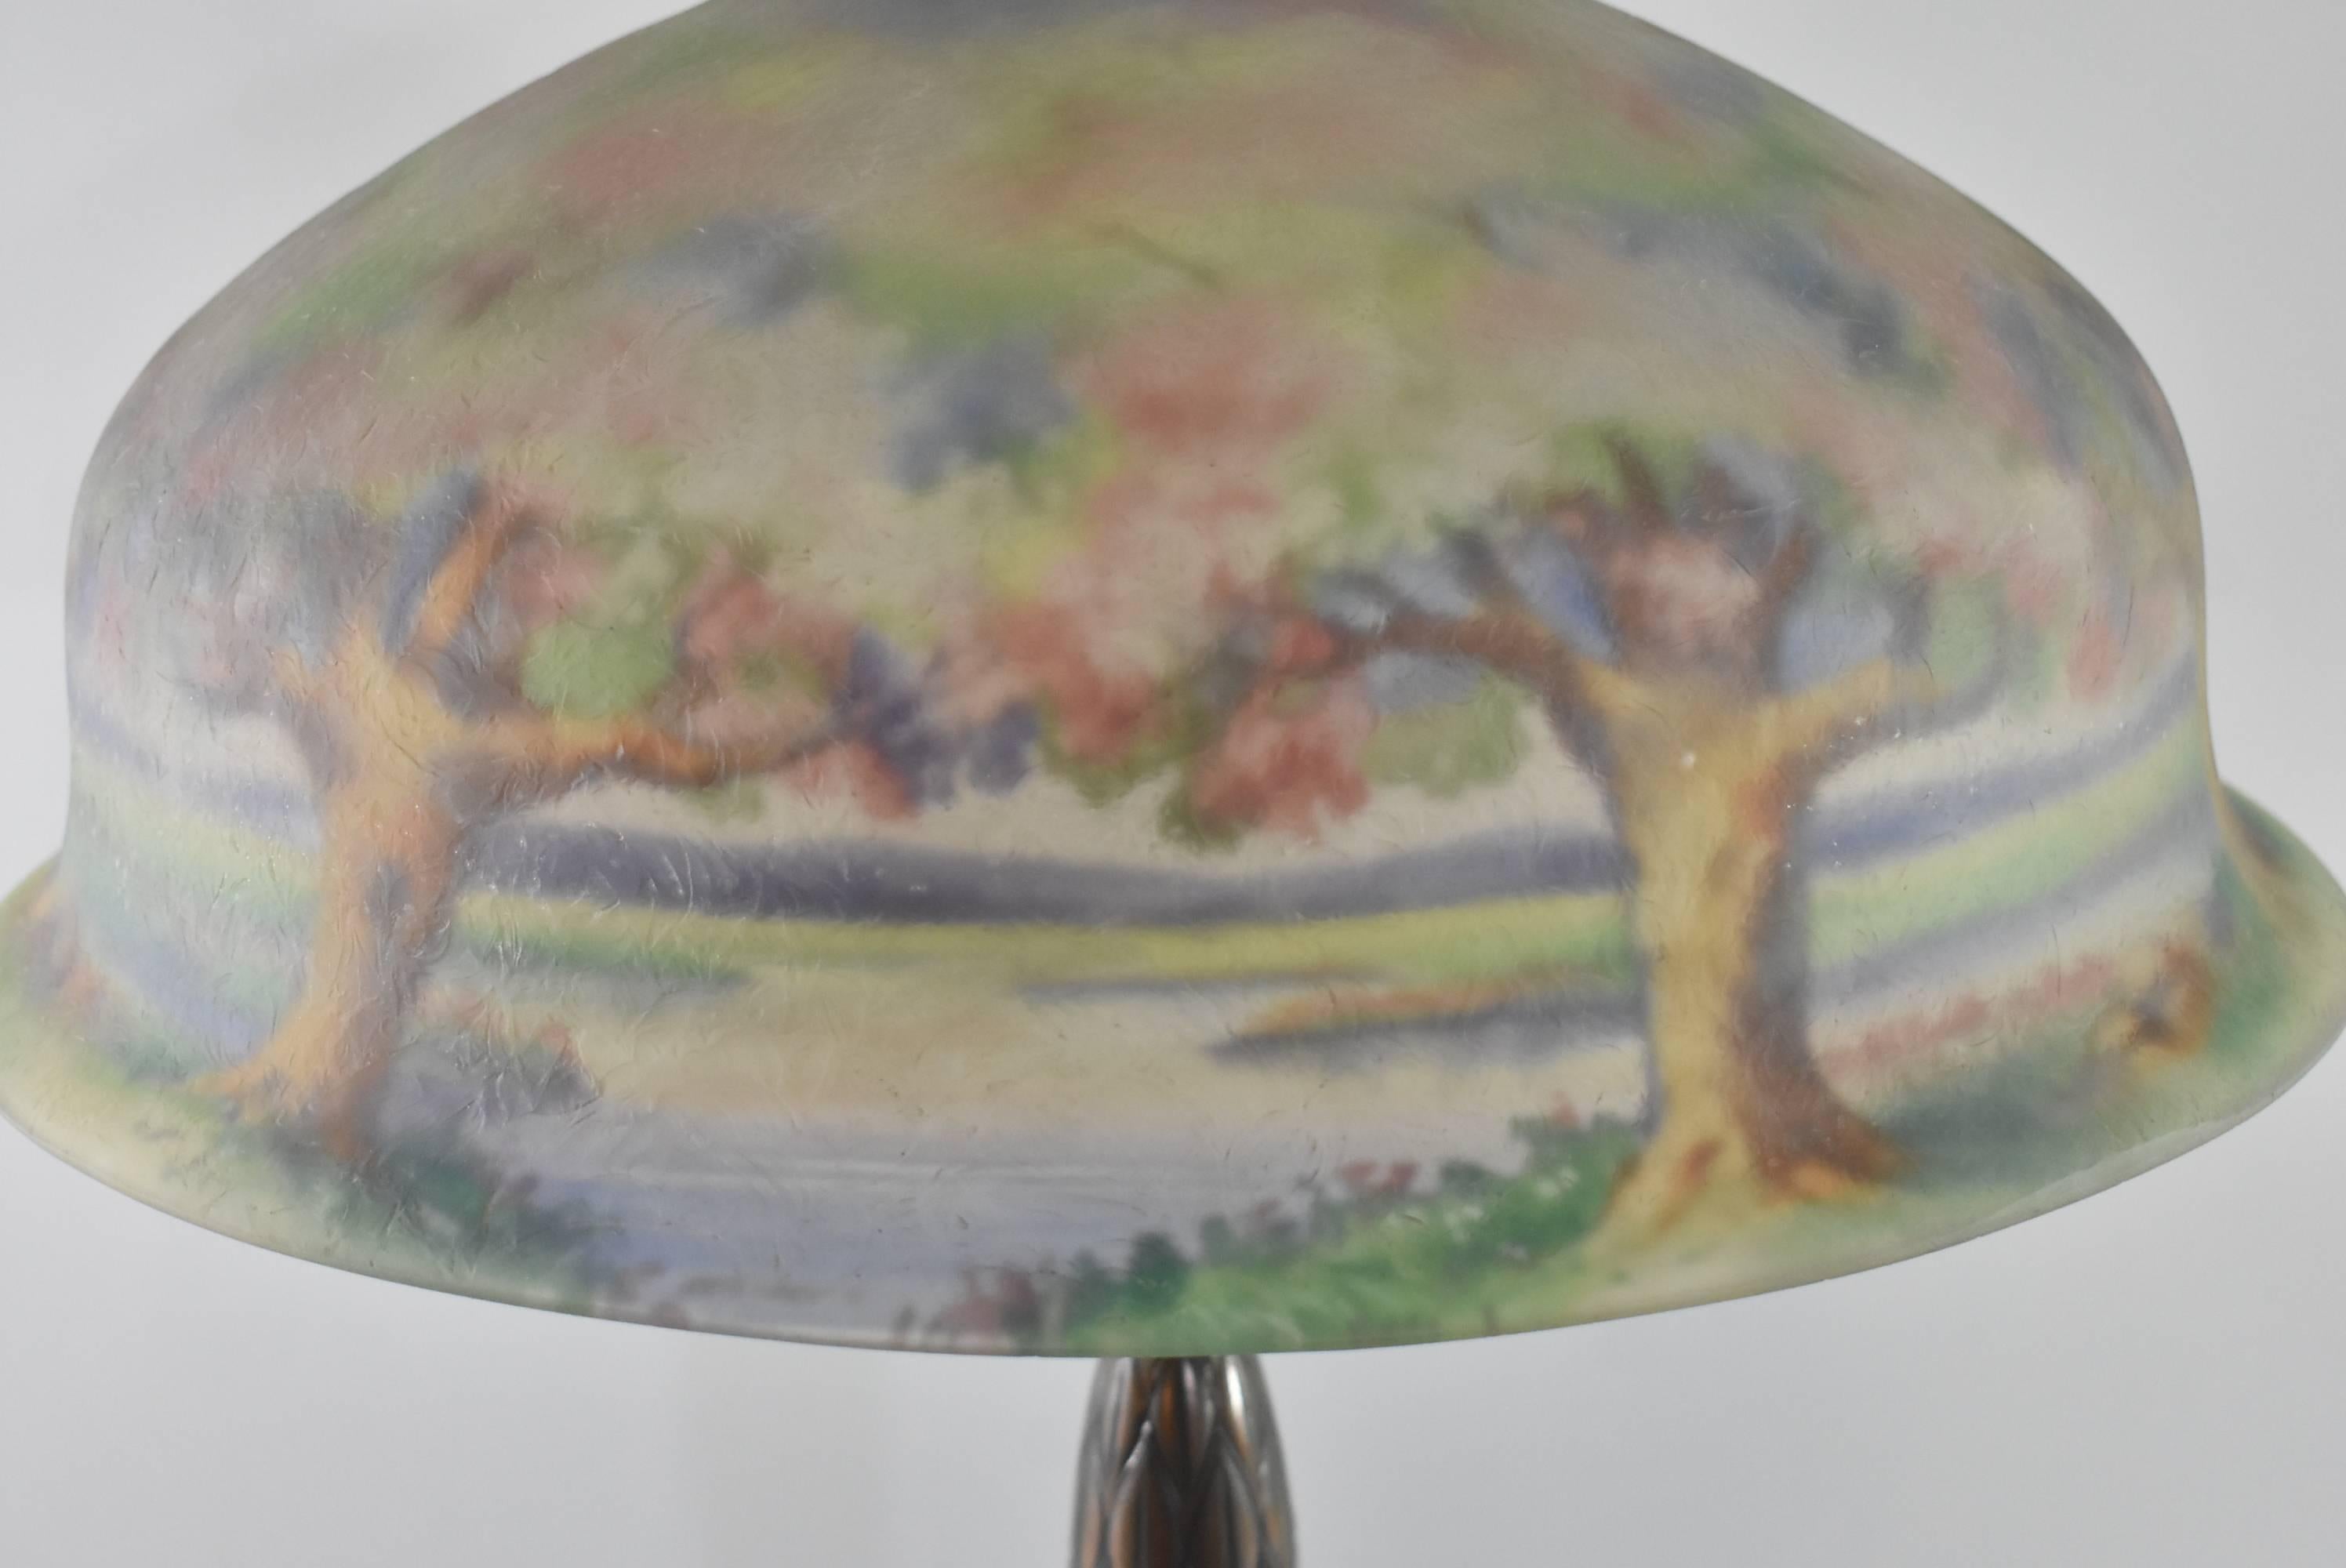 American Classical Antique Reverse Painted Pairpoint Lamp Artist Signed W. Macy Landscape Scene